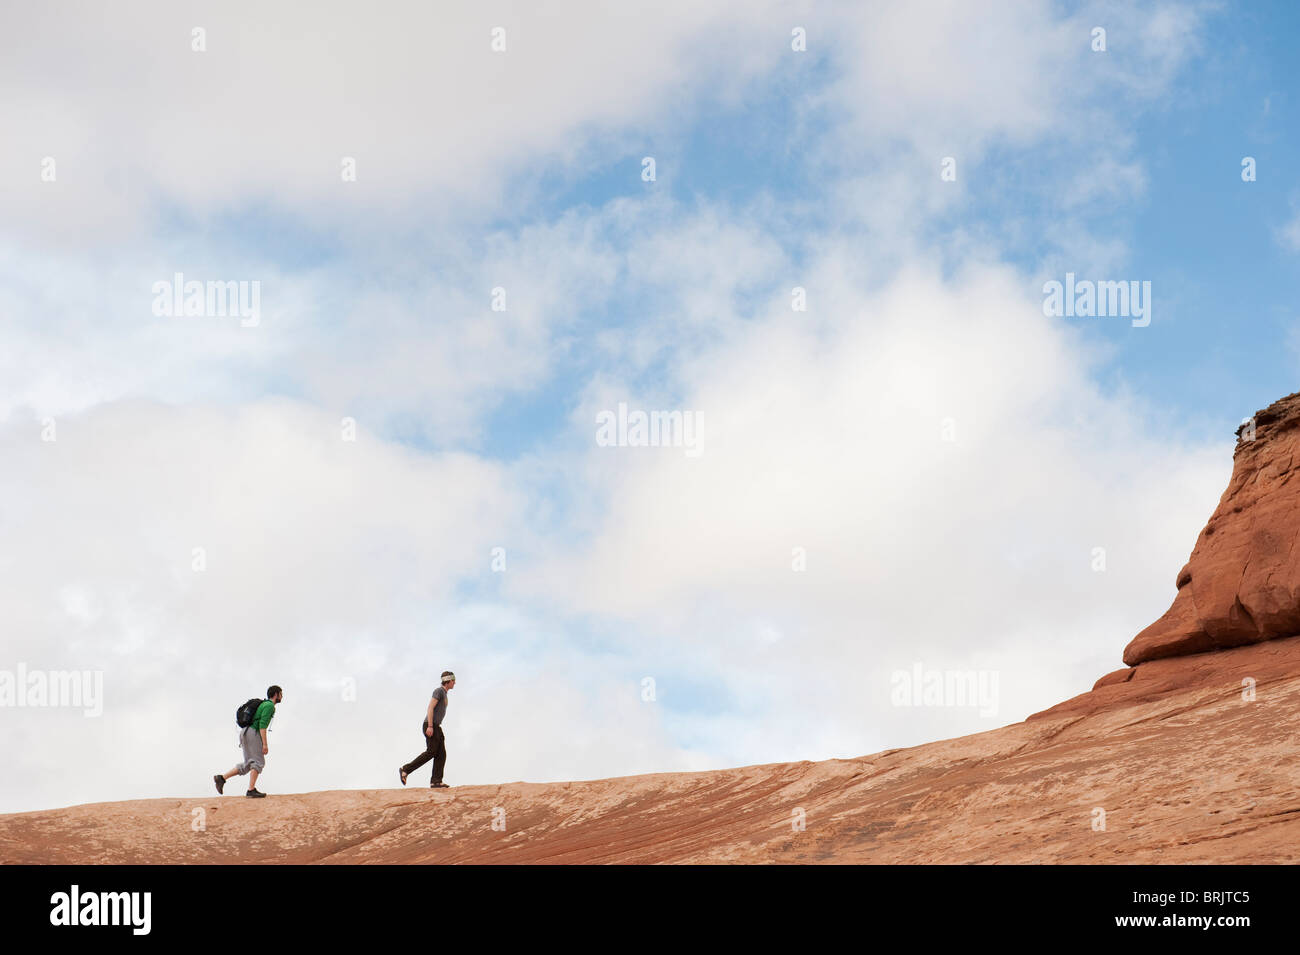 Two young men hiking in Arches National Park, Moab, UT. Stock Photo